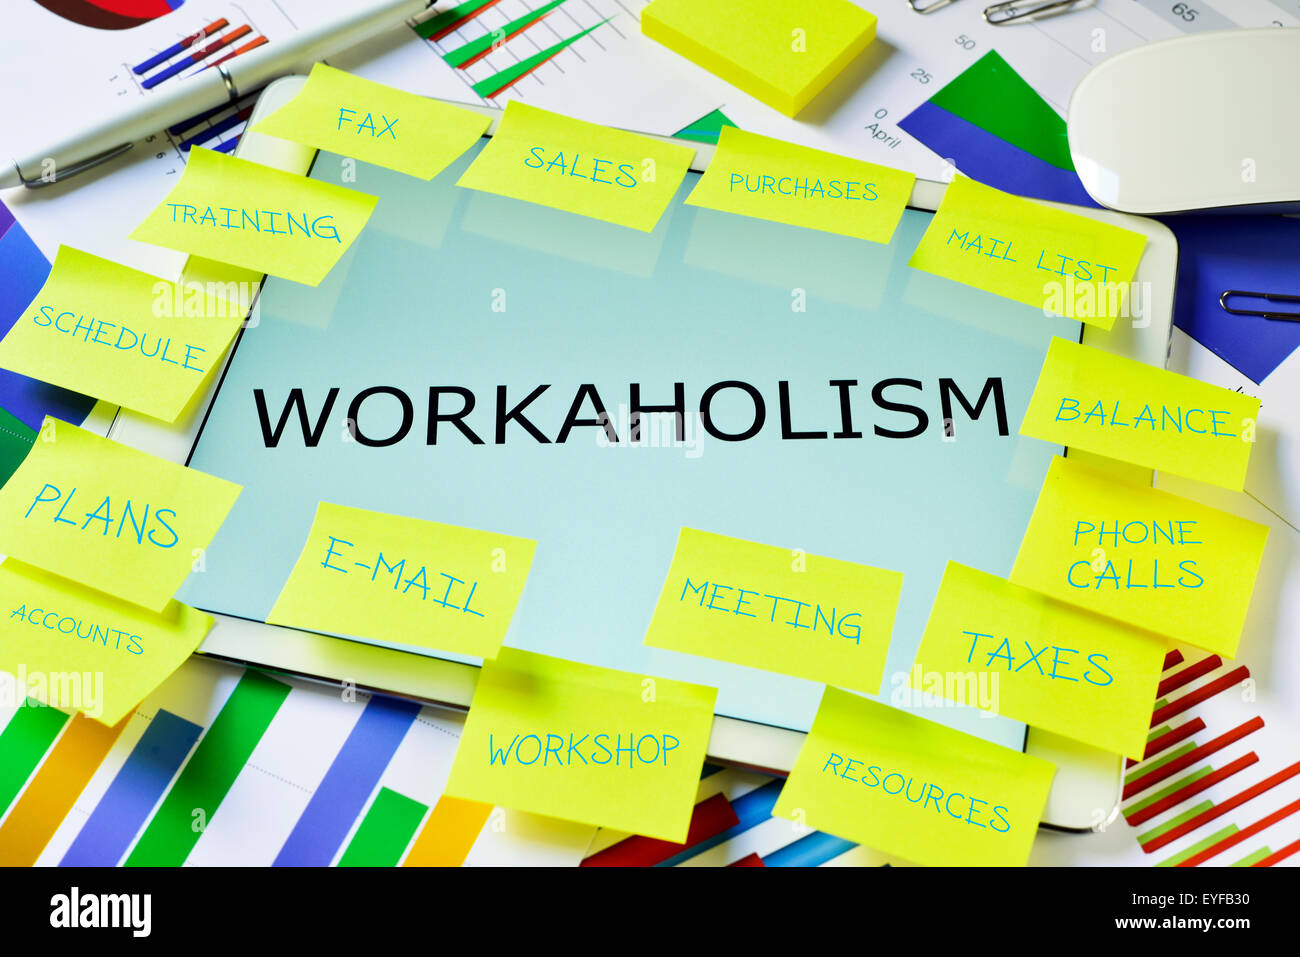 the text workaholism in a tablet computer full of sticky notes with different tasks,  placed on an office desk full of charts Stock Photo